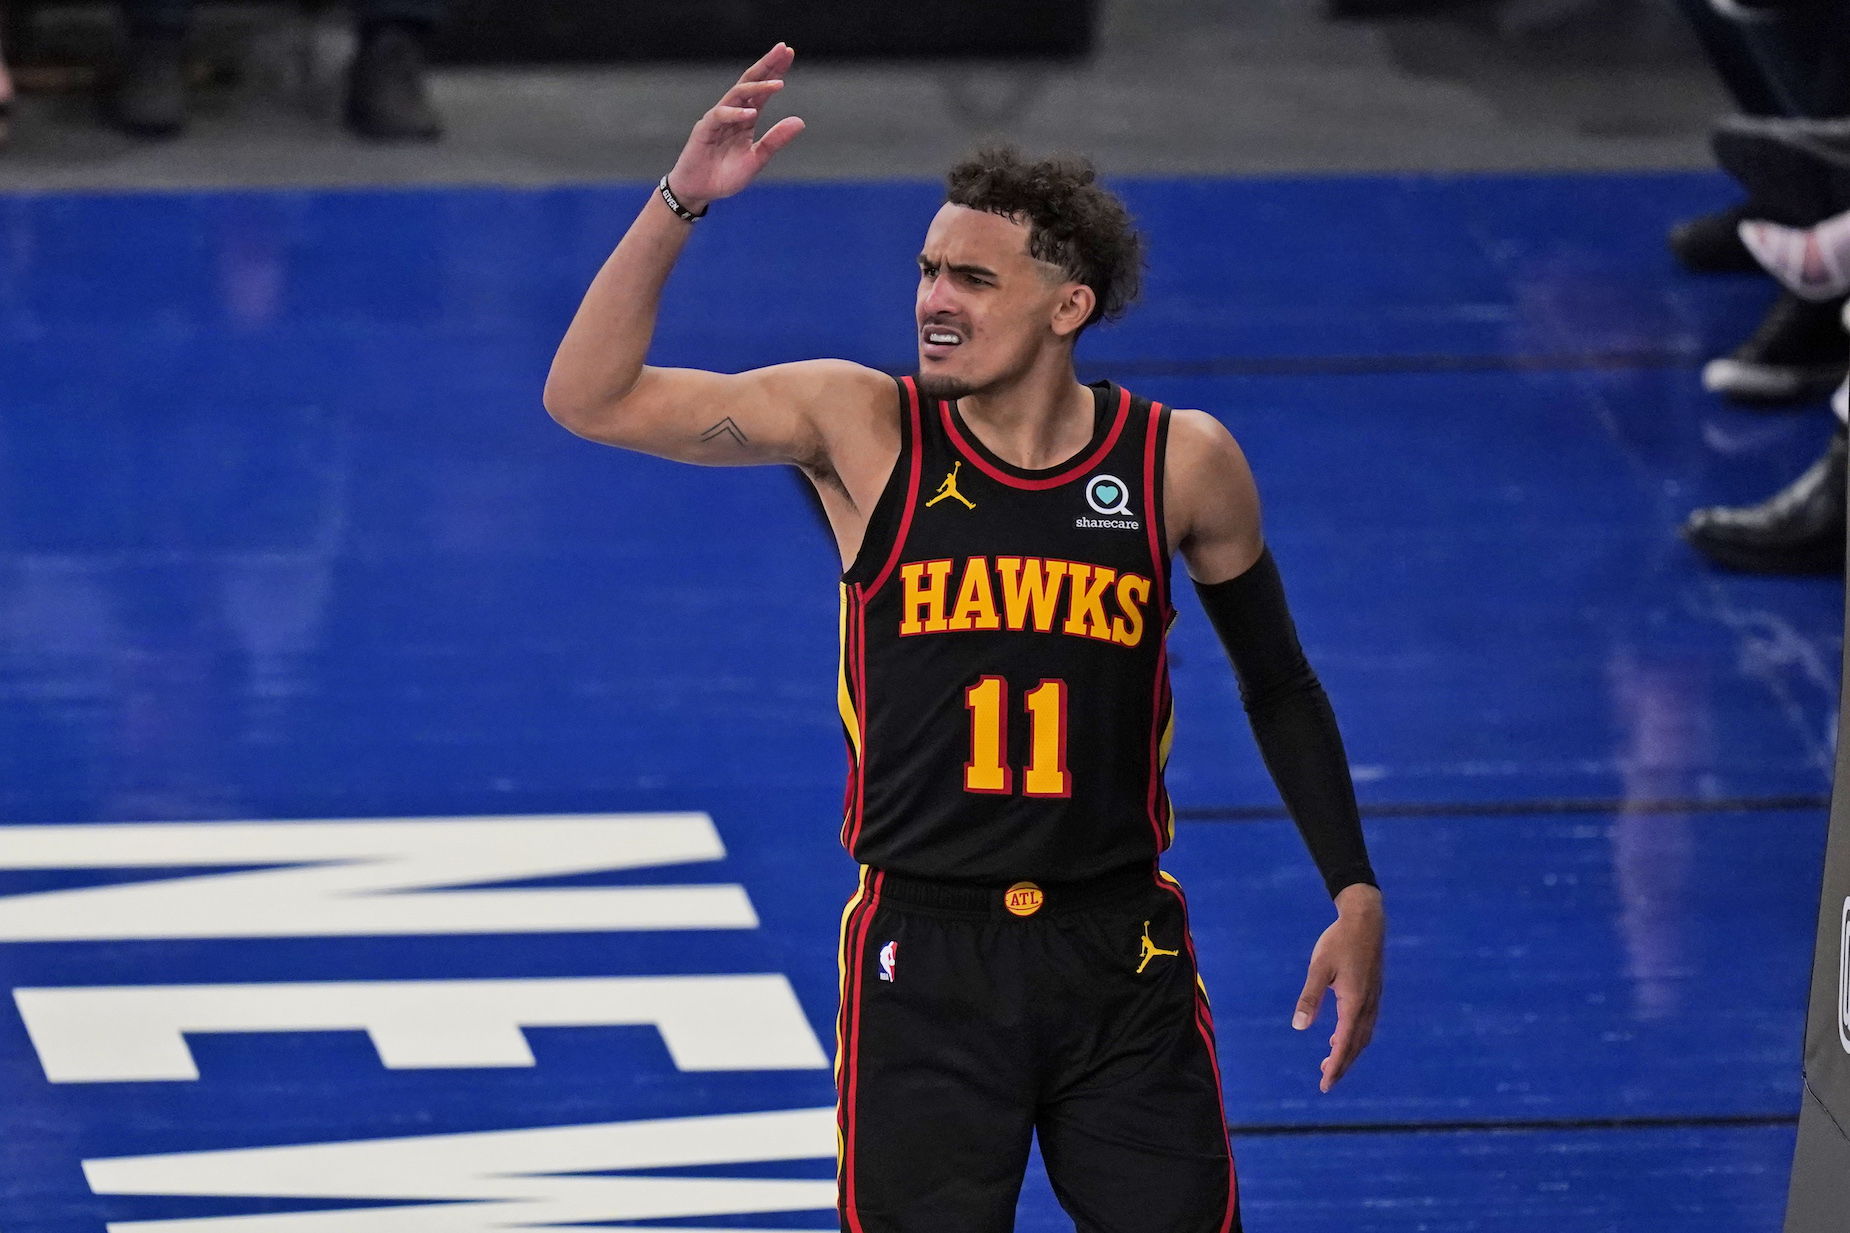 Trae Young silenced the New York Knicks fans during Game 1 of the Hawks' playoff series.